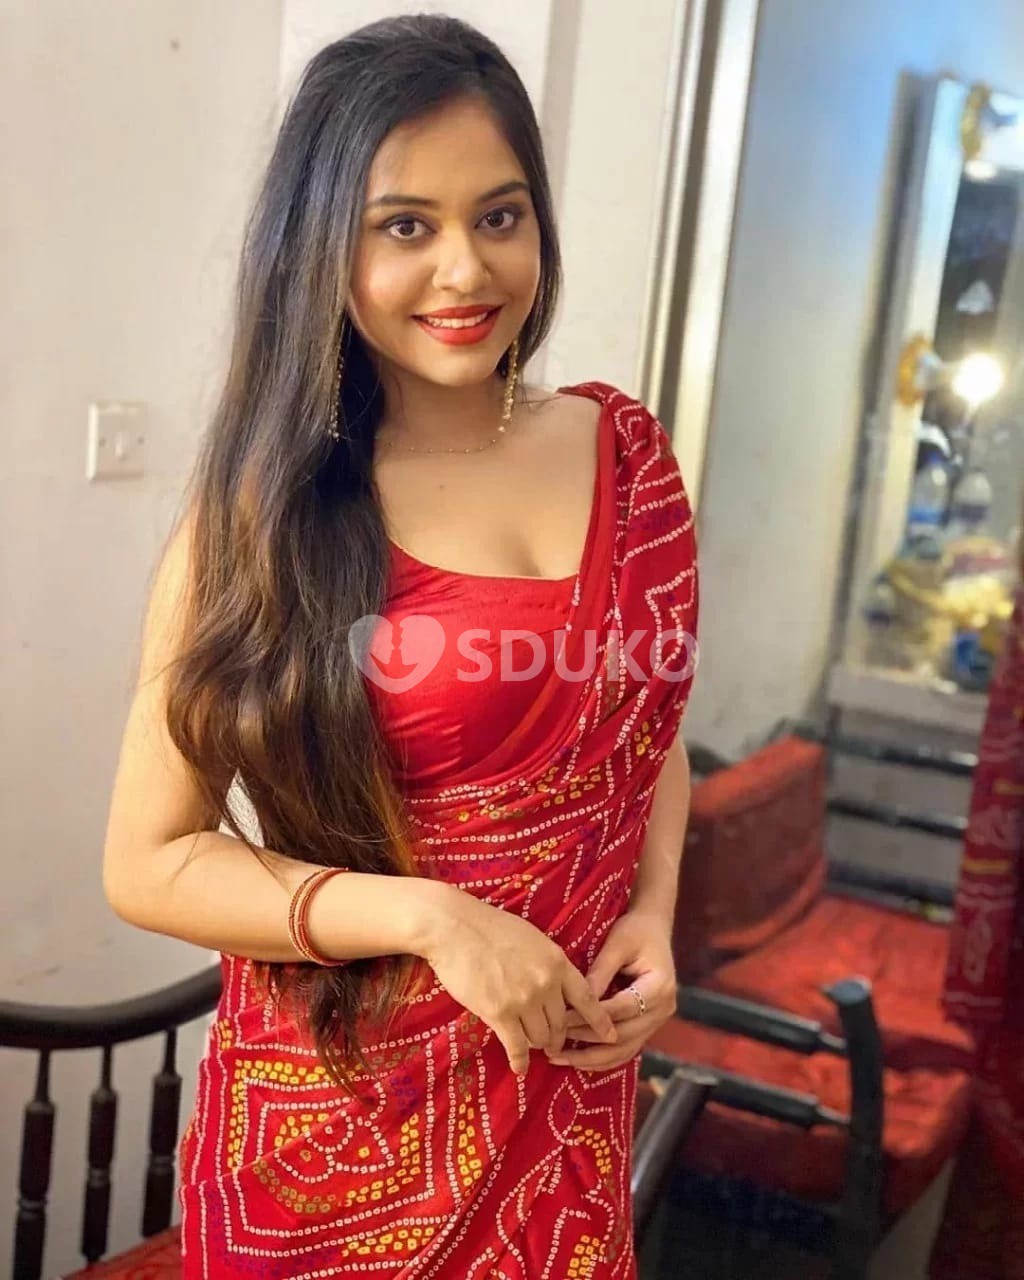 KUKATPALLY BEST VIP GIRLS🌟24x7❣️❣️ AFFORDABLE CHEAPEST RATE IN SAFE CALL GIRL SERVICES PROVIDES